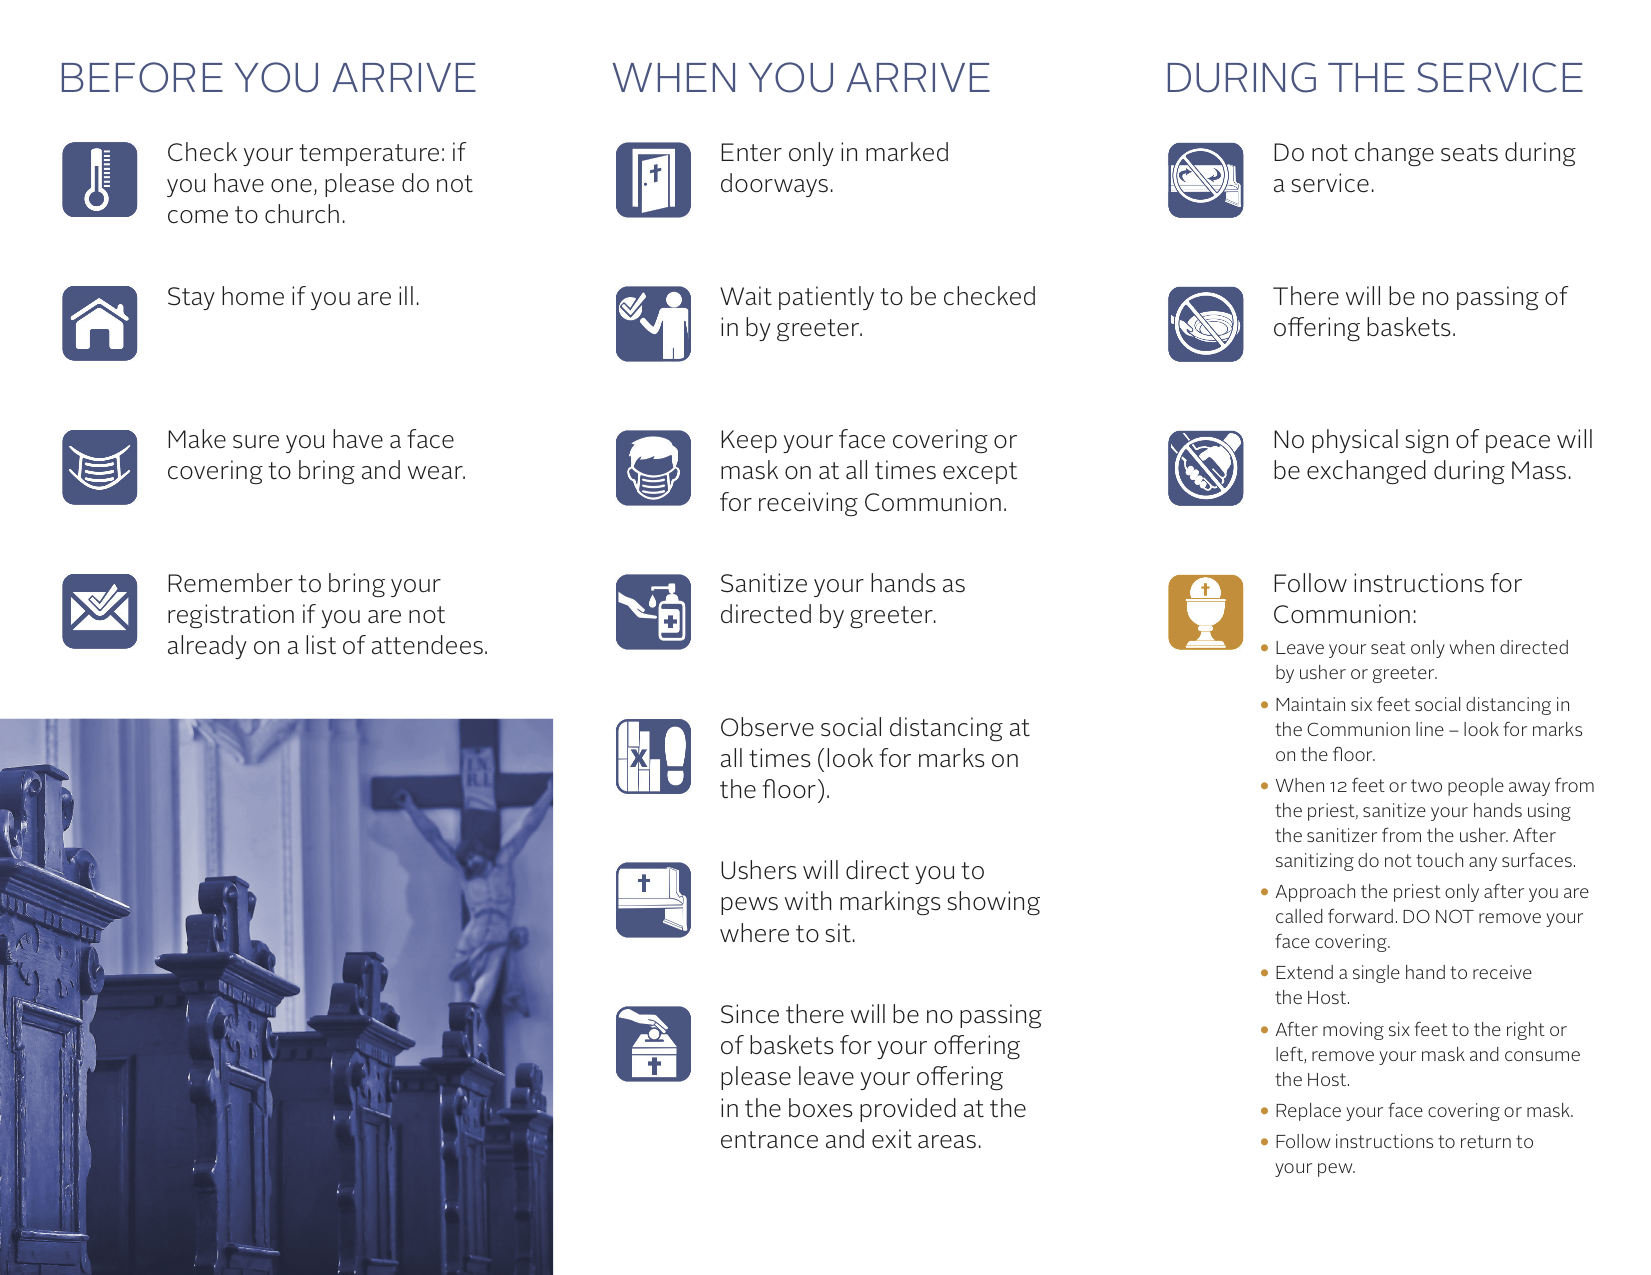 pamphlet from Archdiocese of Chicago on tips for parishioners returning to church